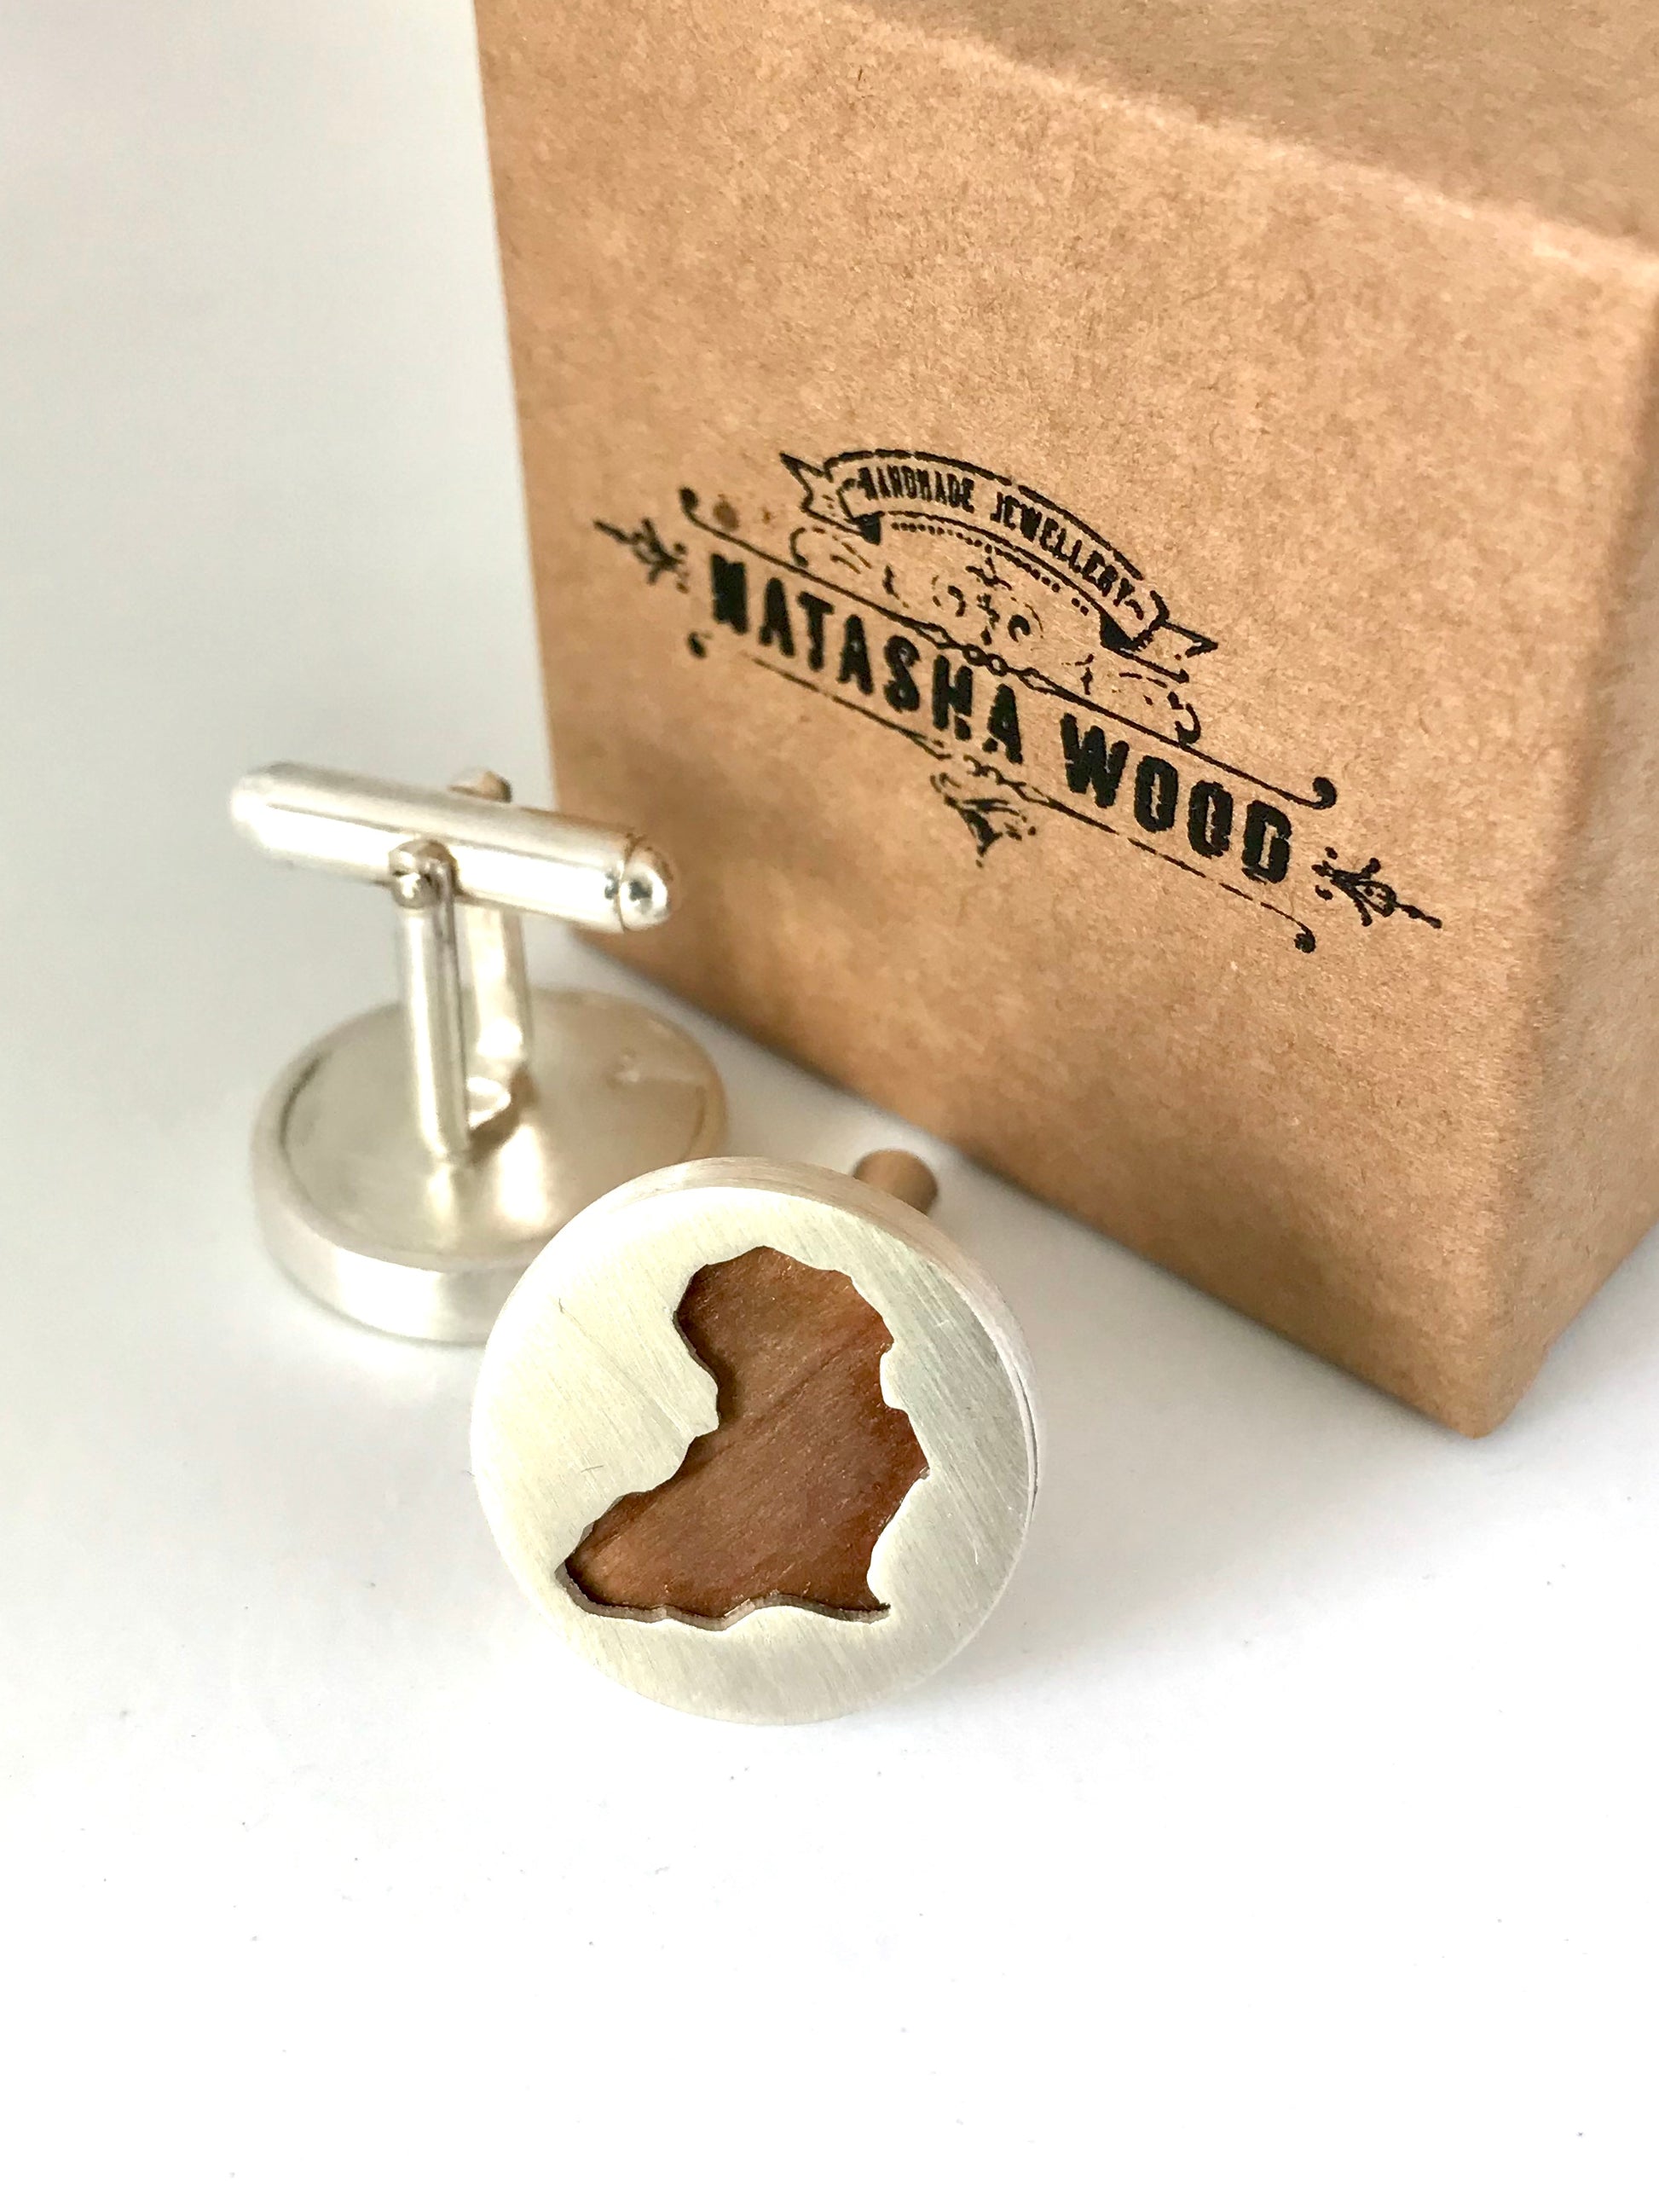 Packaged handcrafted Africa silhouette wooden cufflinks in branded Natasha Wood Jewellery box